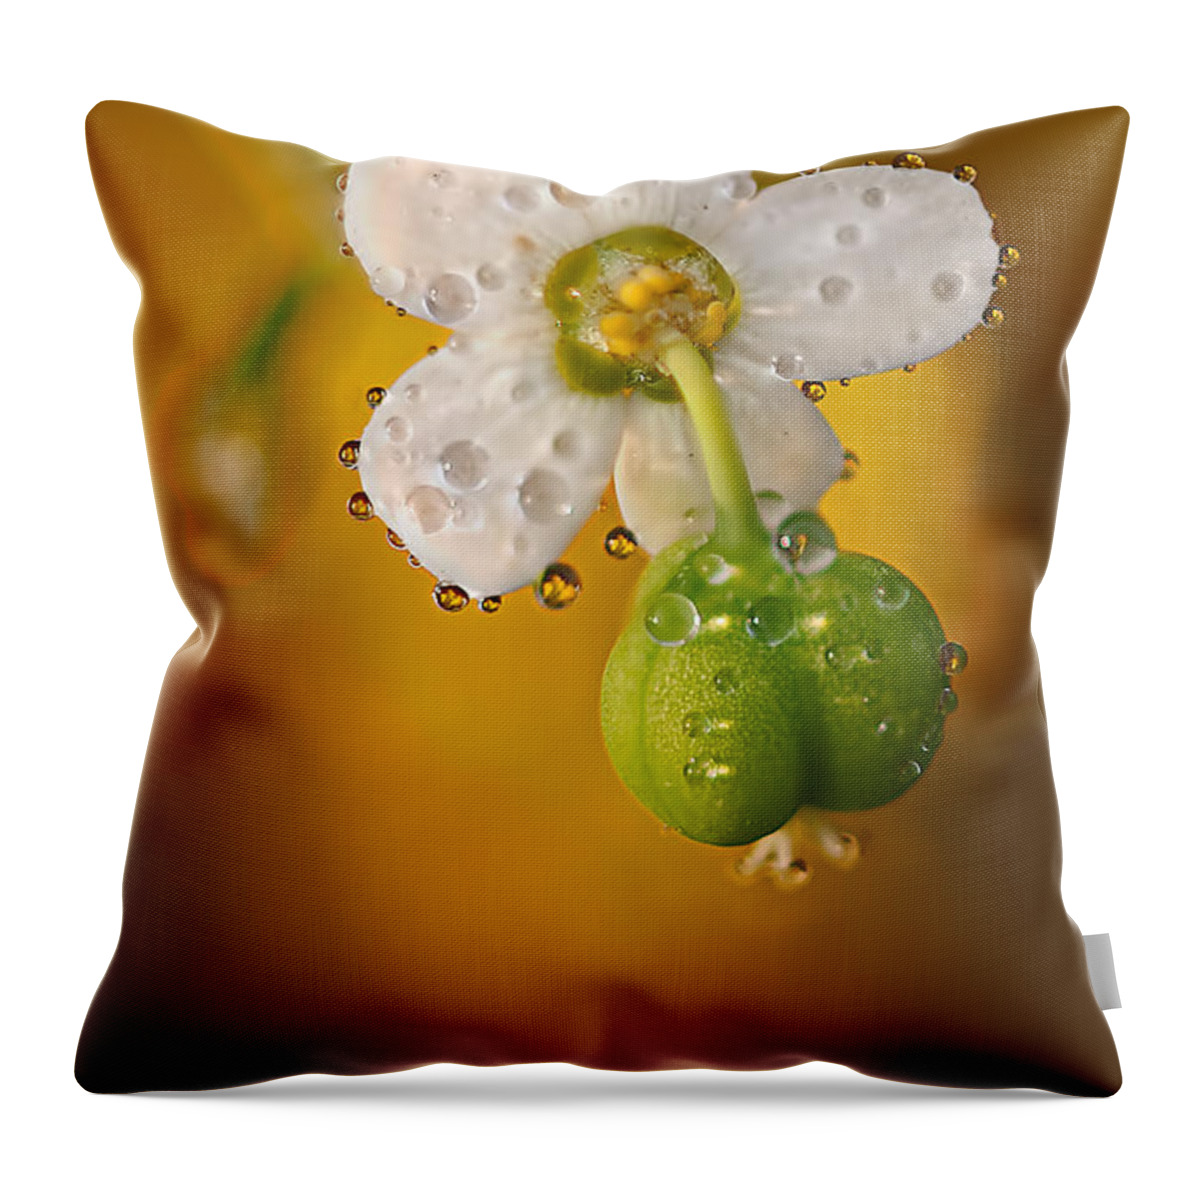 2012 Throw Pillow featuring the photograph Flowering Spurge by Robert Charity